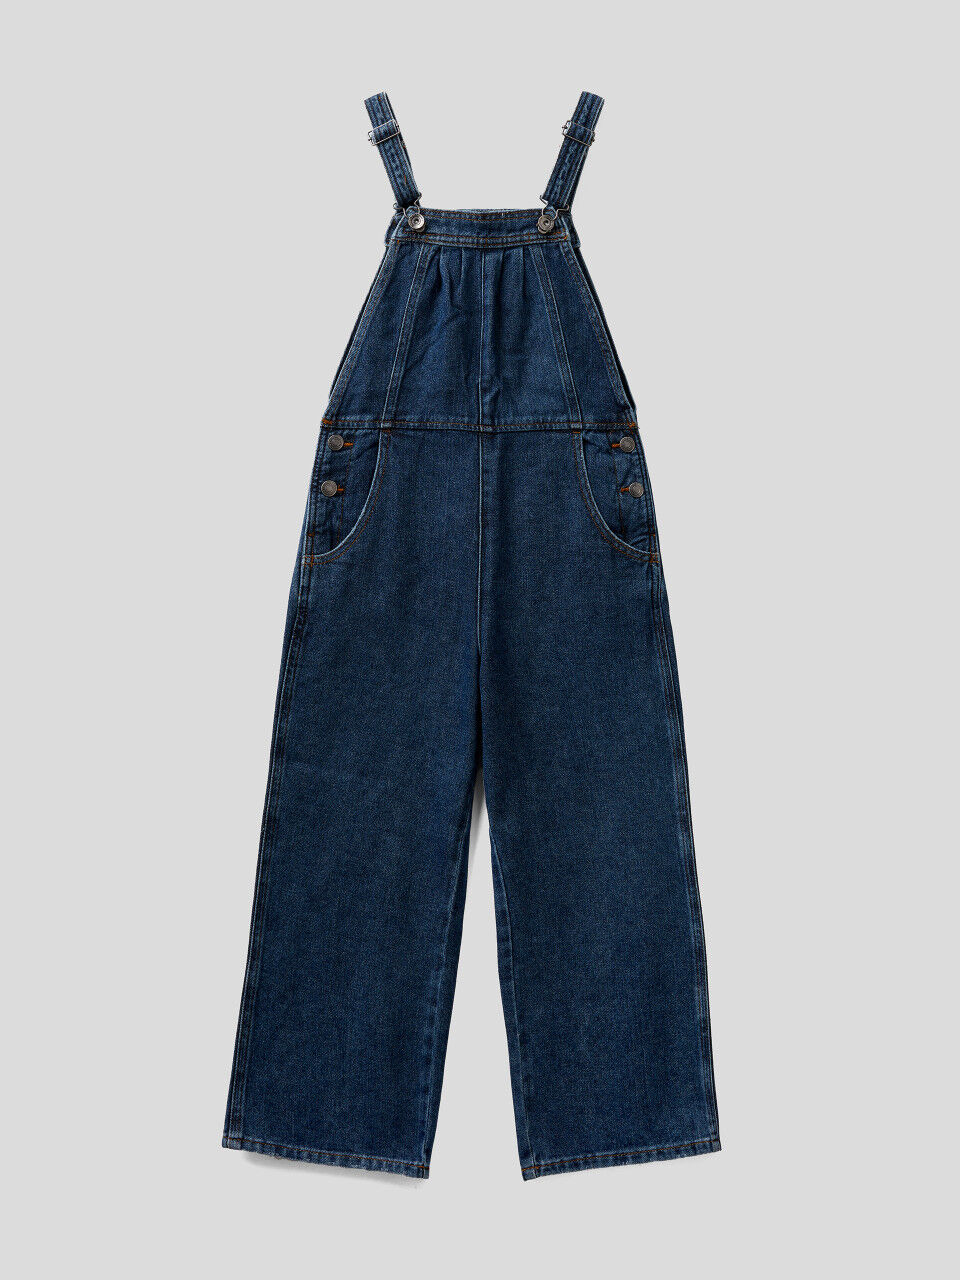 Dungarees in "Eco-Recycle" denim